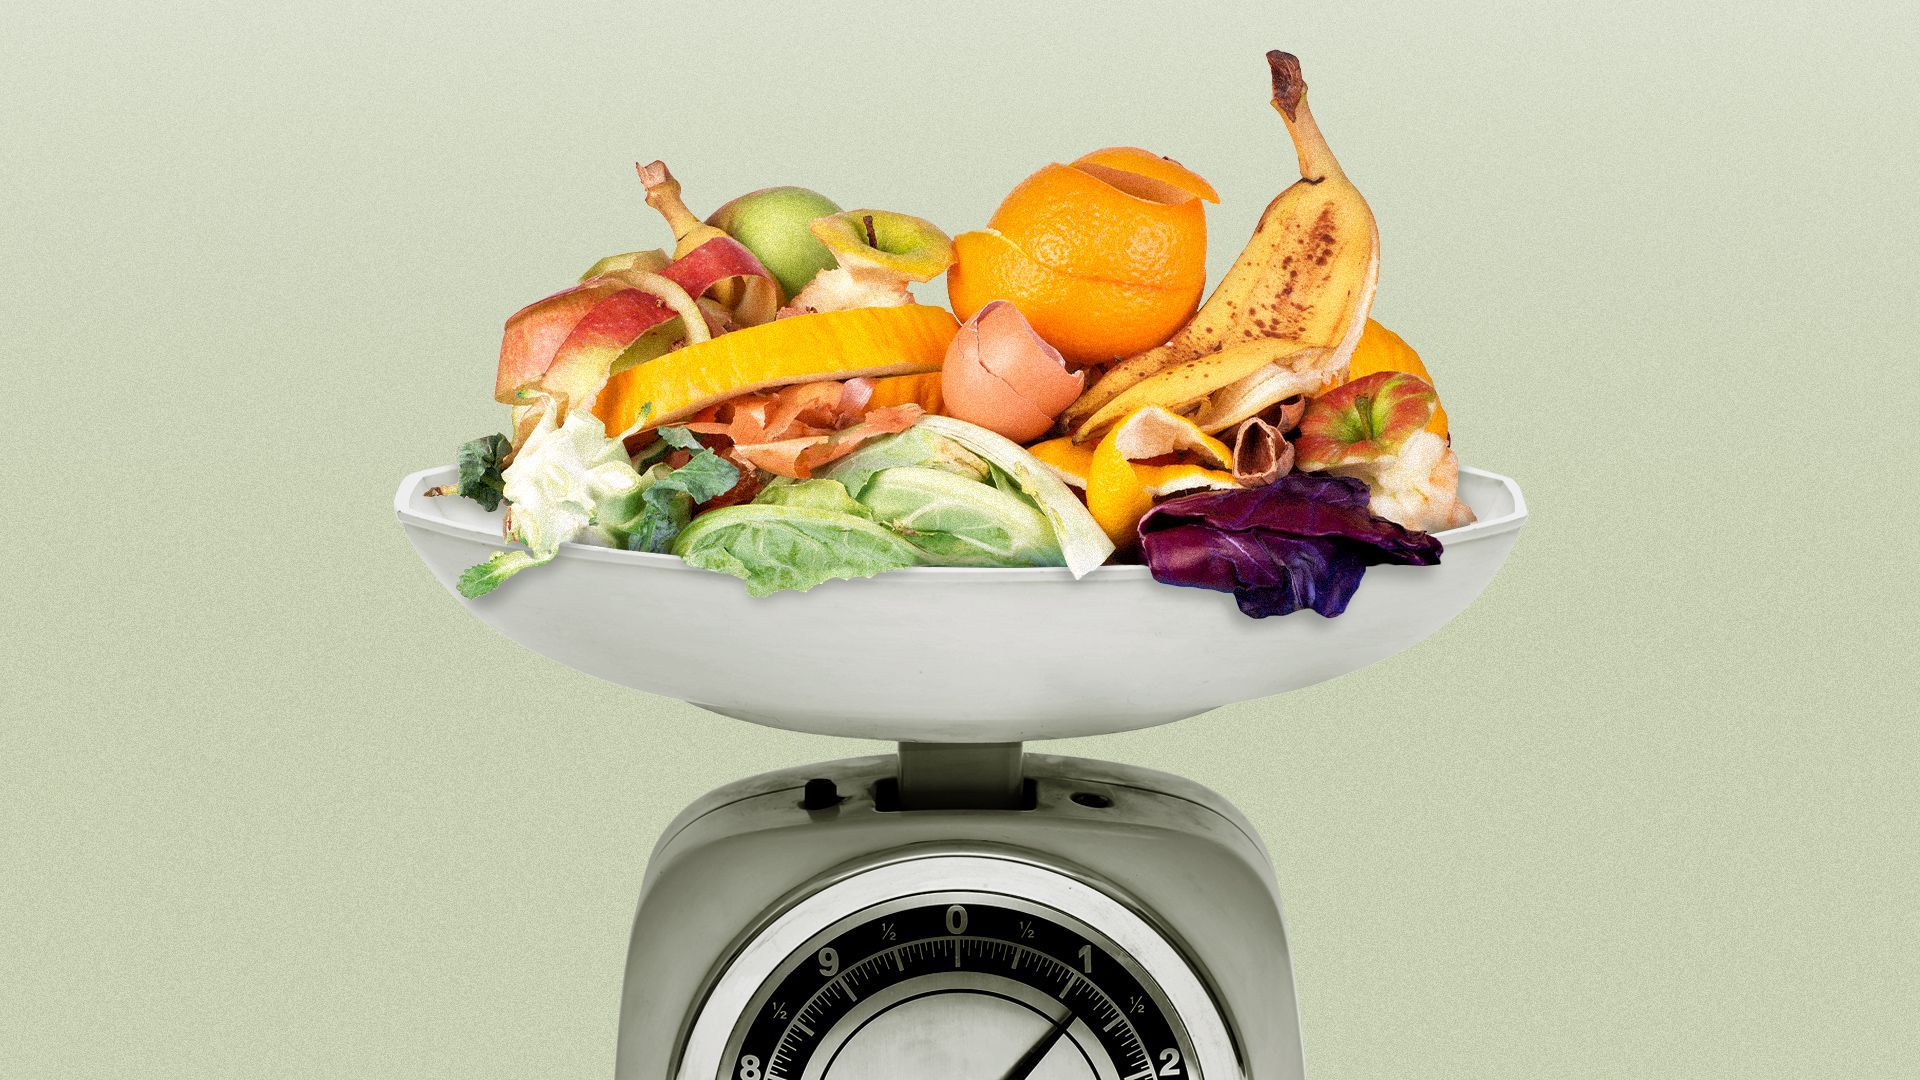 Illustration of food waste piled on a kitchen scale.